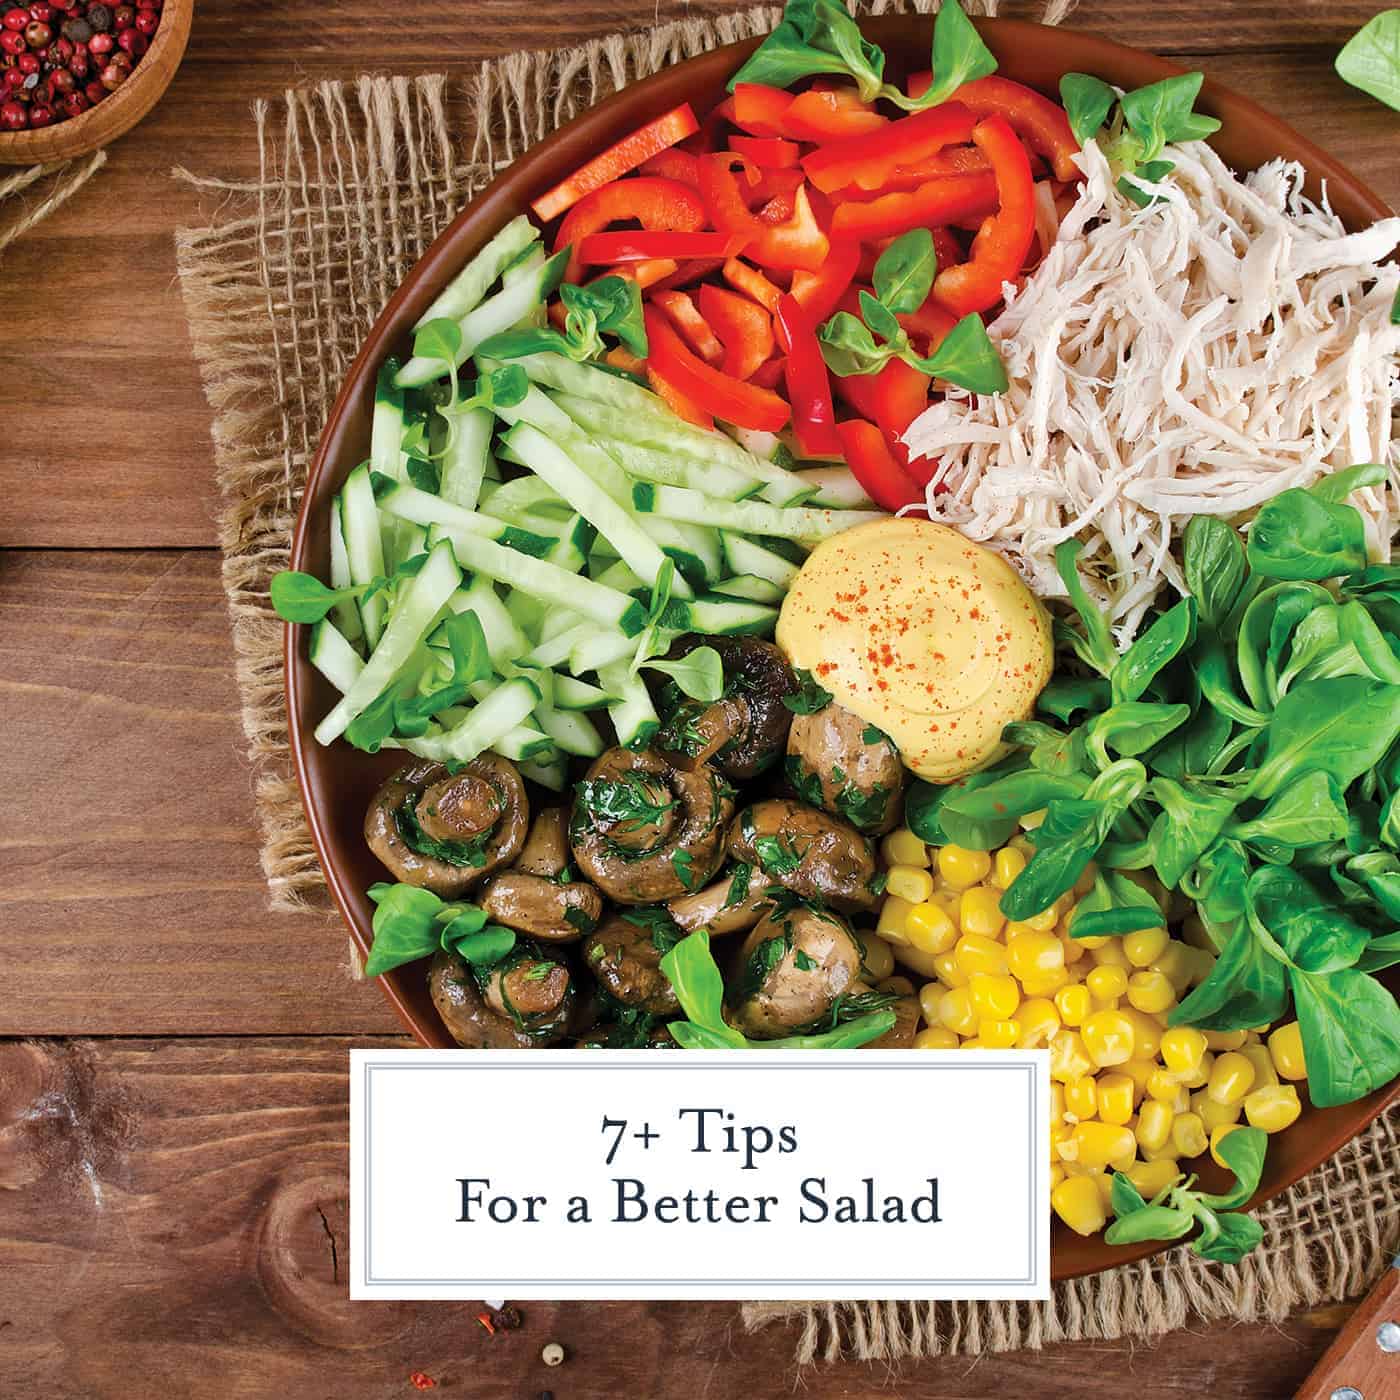 7 Tips for More Interesting Salads- #4 will surely surprise you! #saladrecipes #saladideas www.savoryexperiments.com